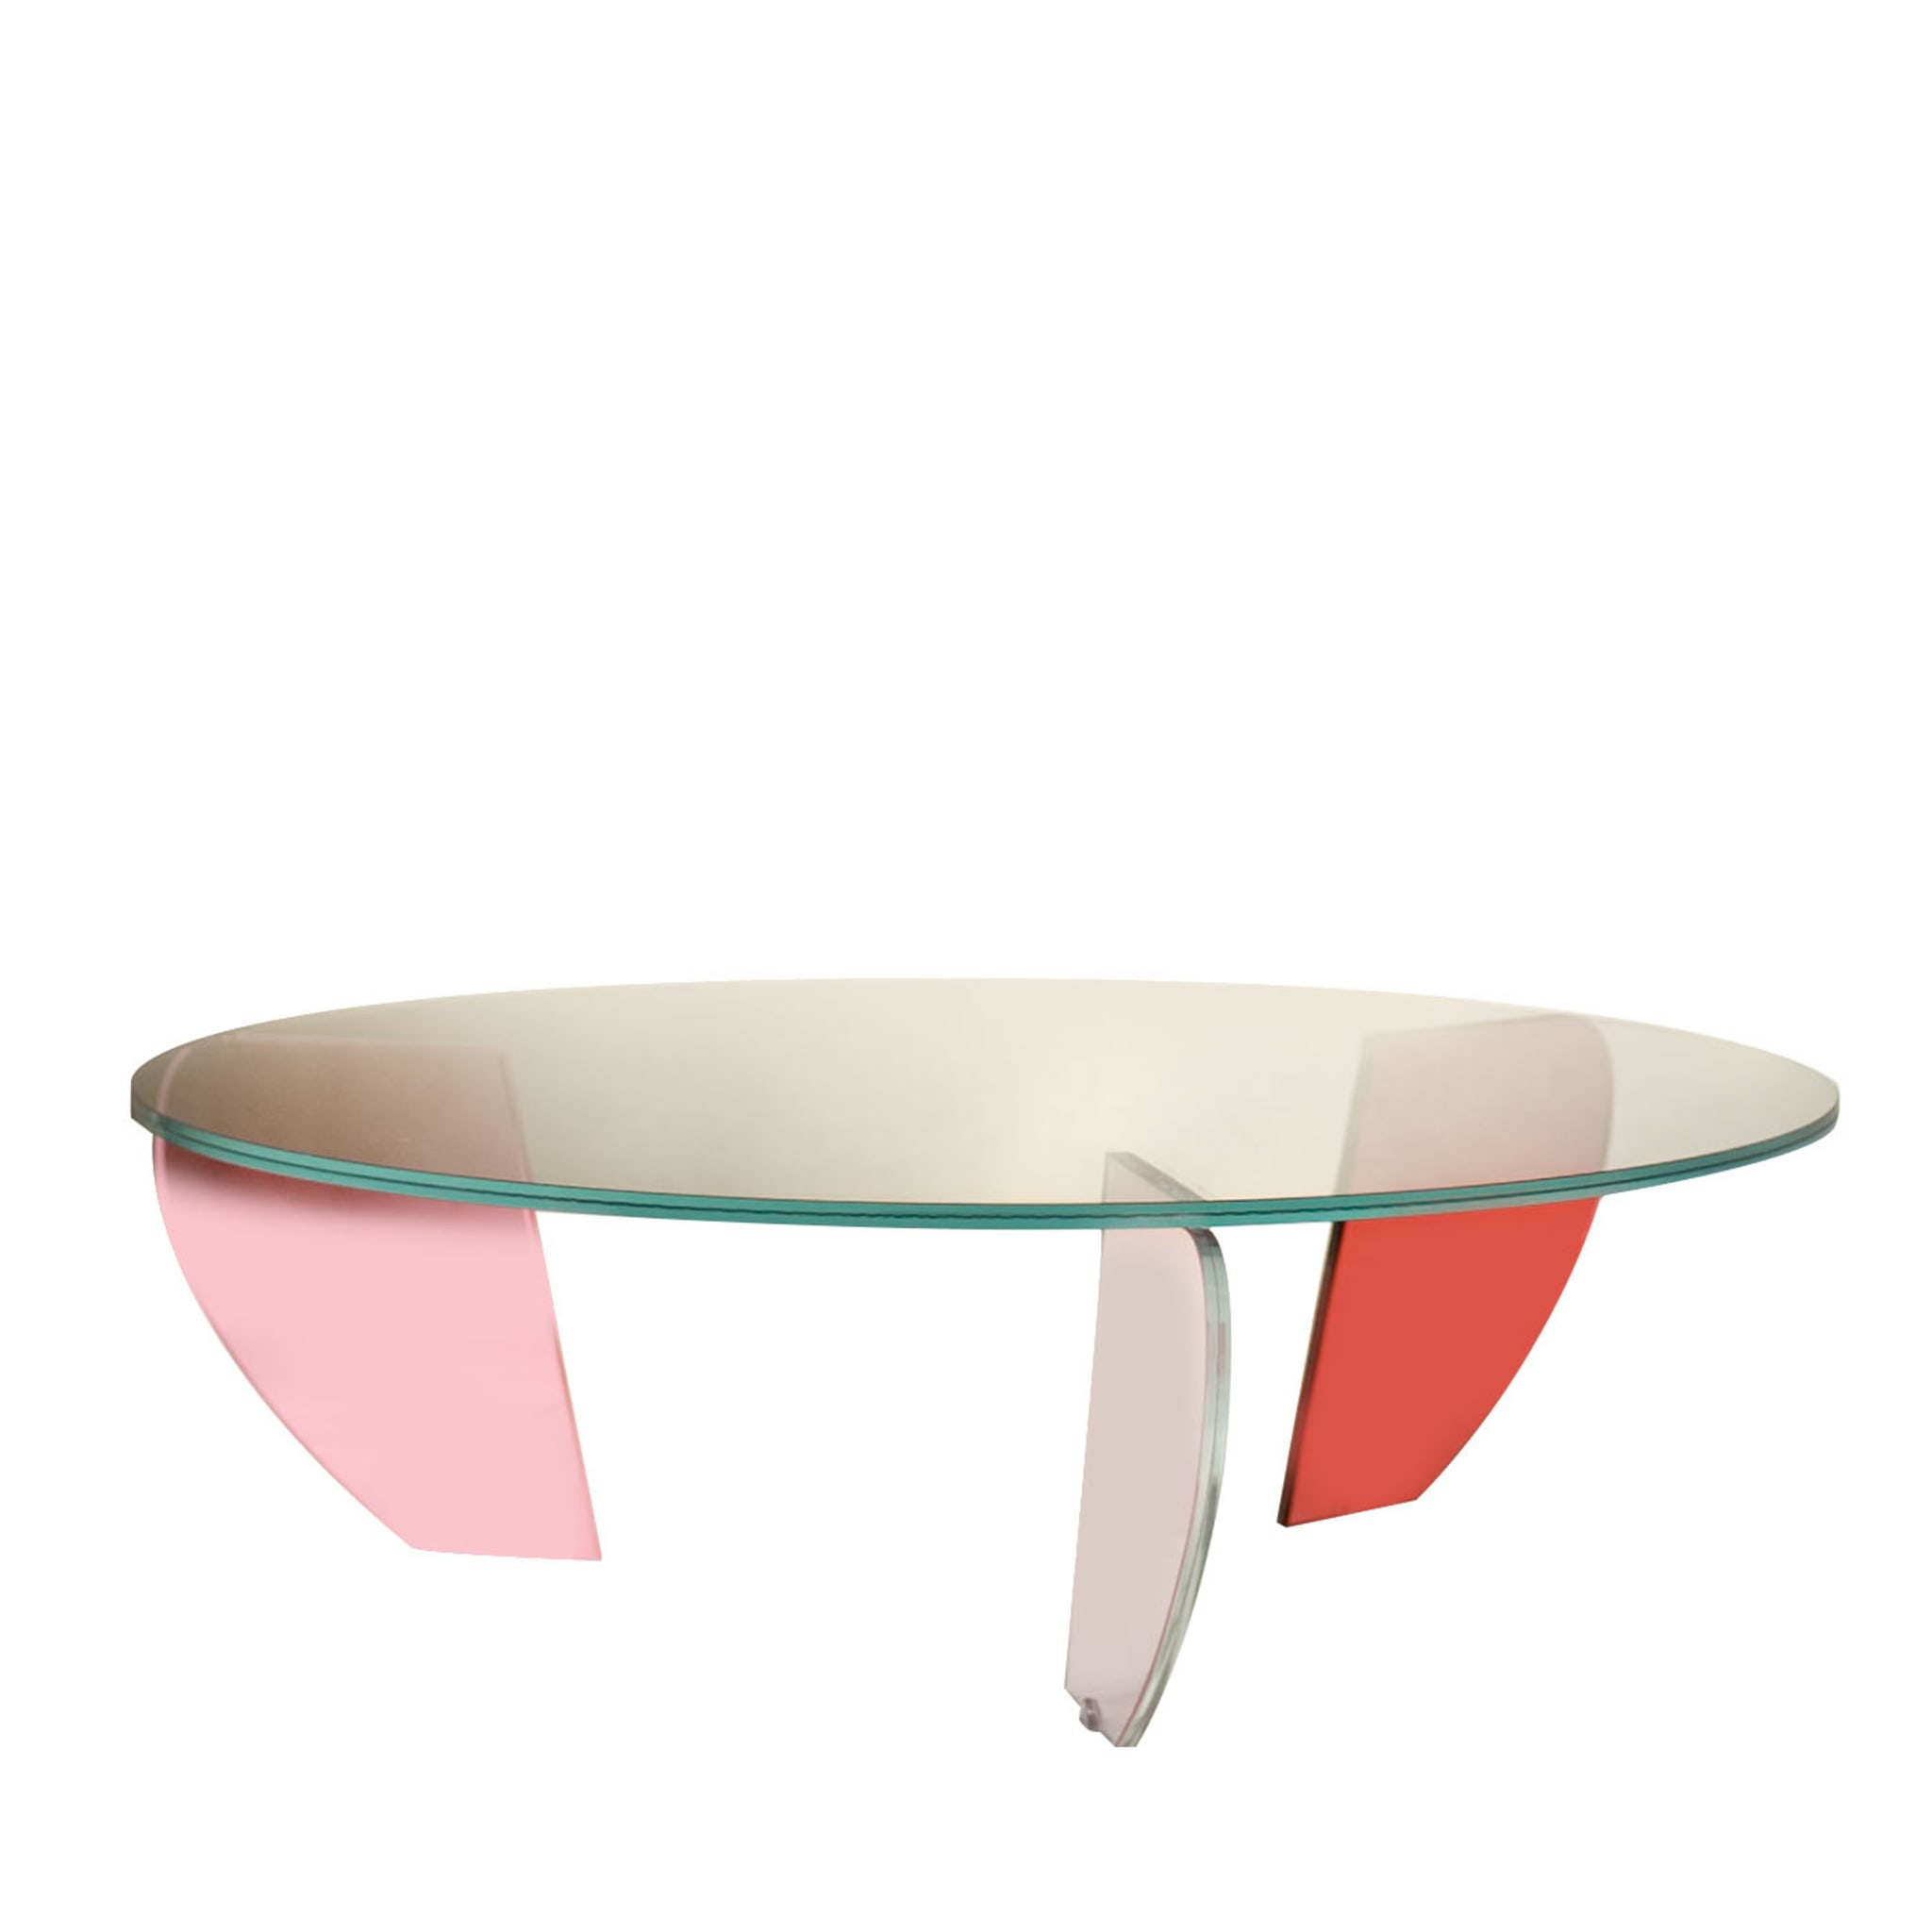 Teo Large Colored Coffee Table by Andrea Petterini - Main view